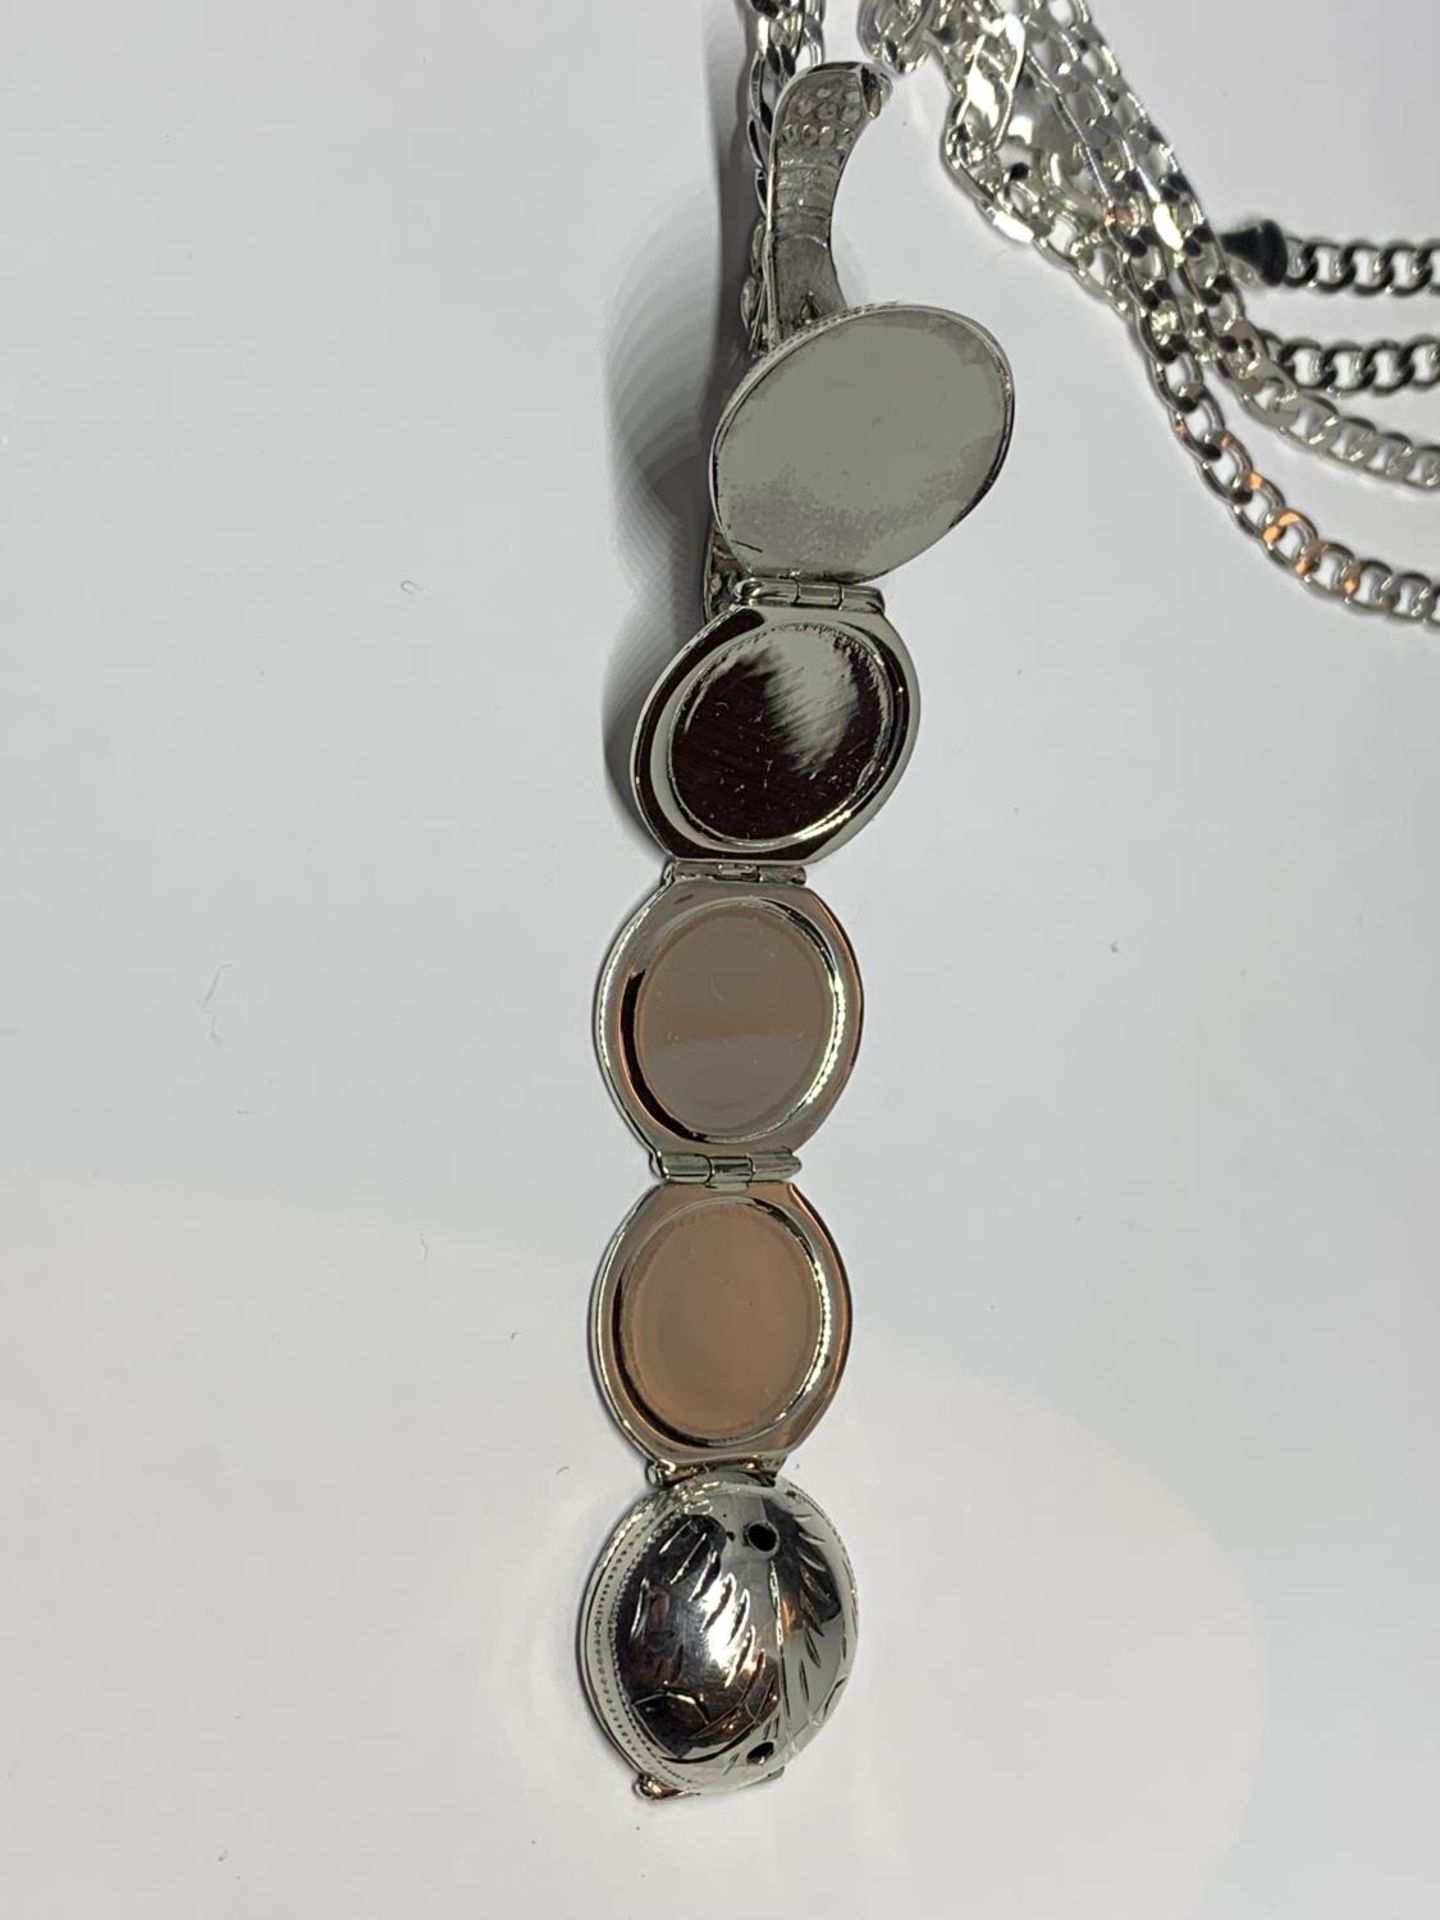 A MARKD SILVER NECKLACE WITH AN ORNATE BALL LOCKET PENDANT - Image 6 of 8